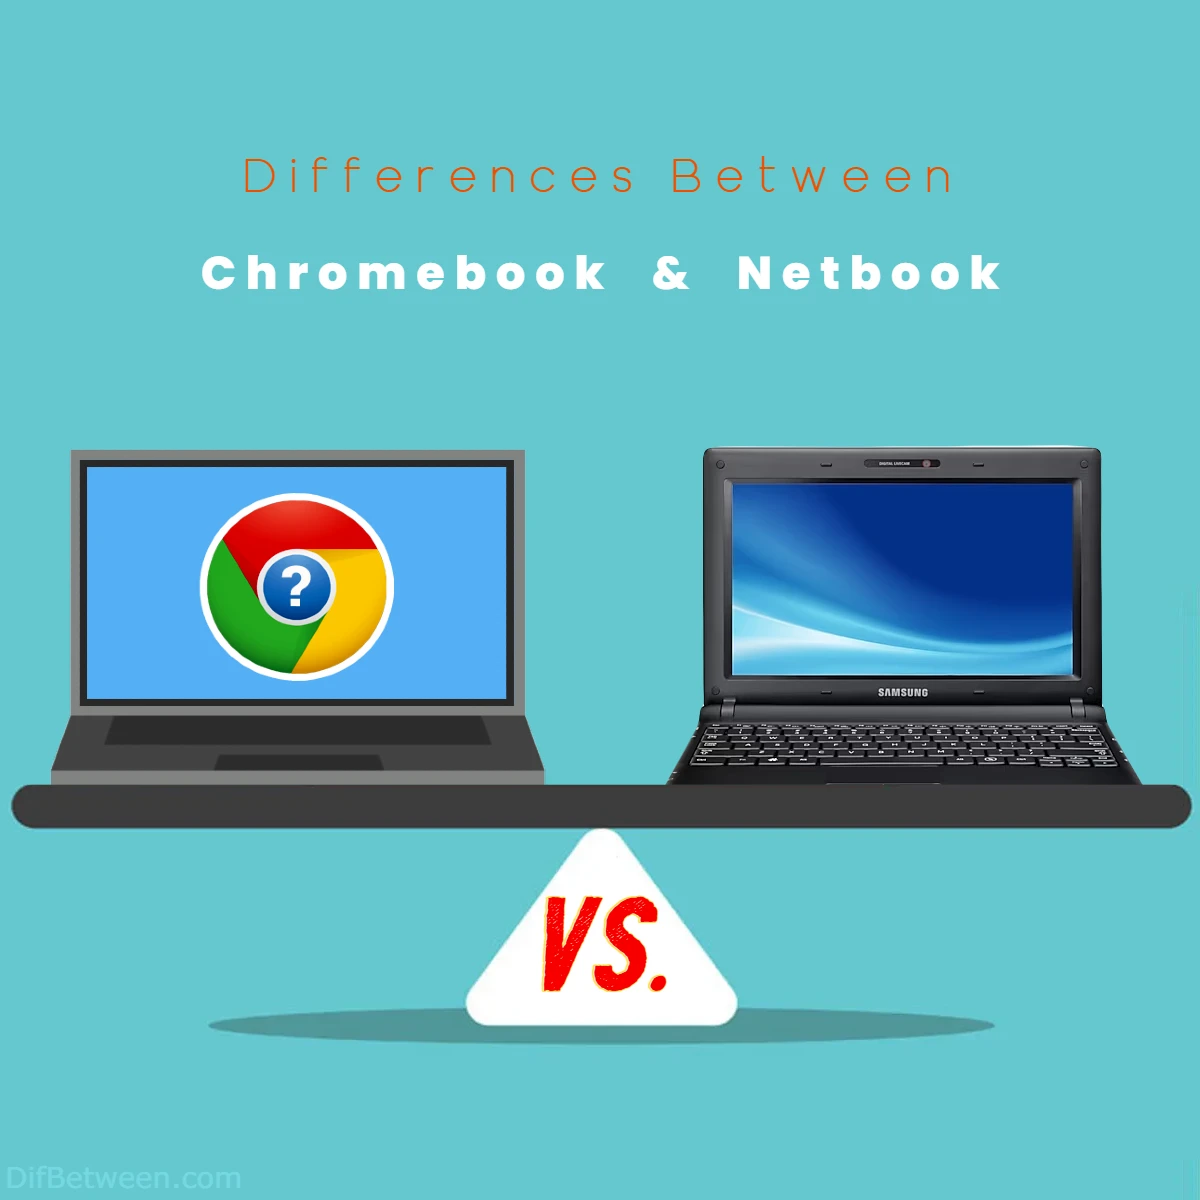 Differences Between Chromebook vs Netbook